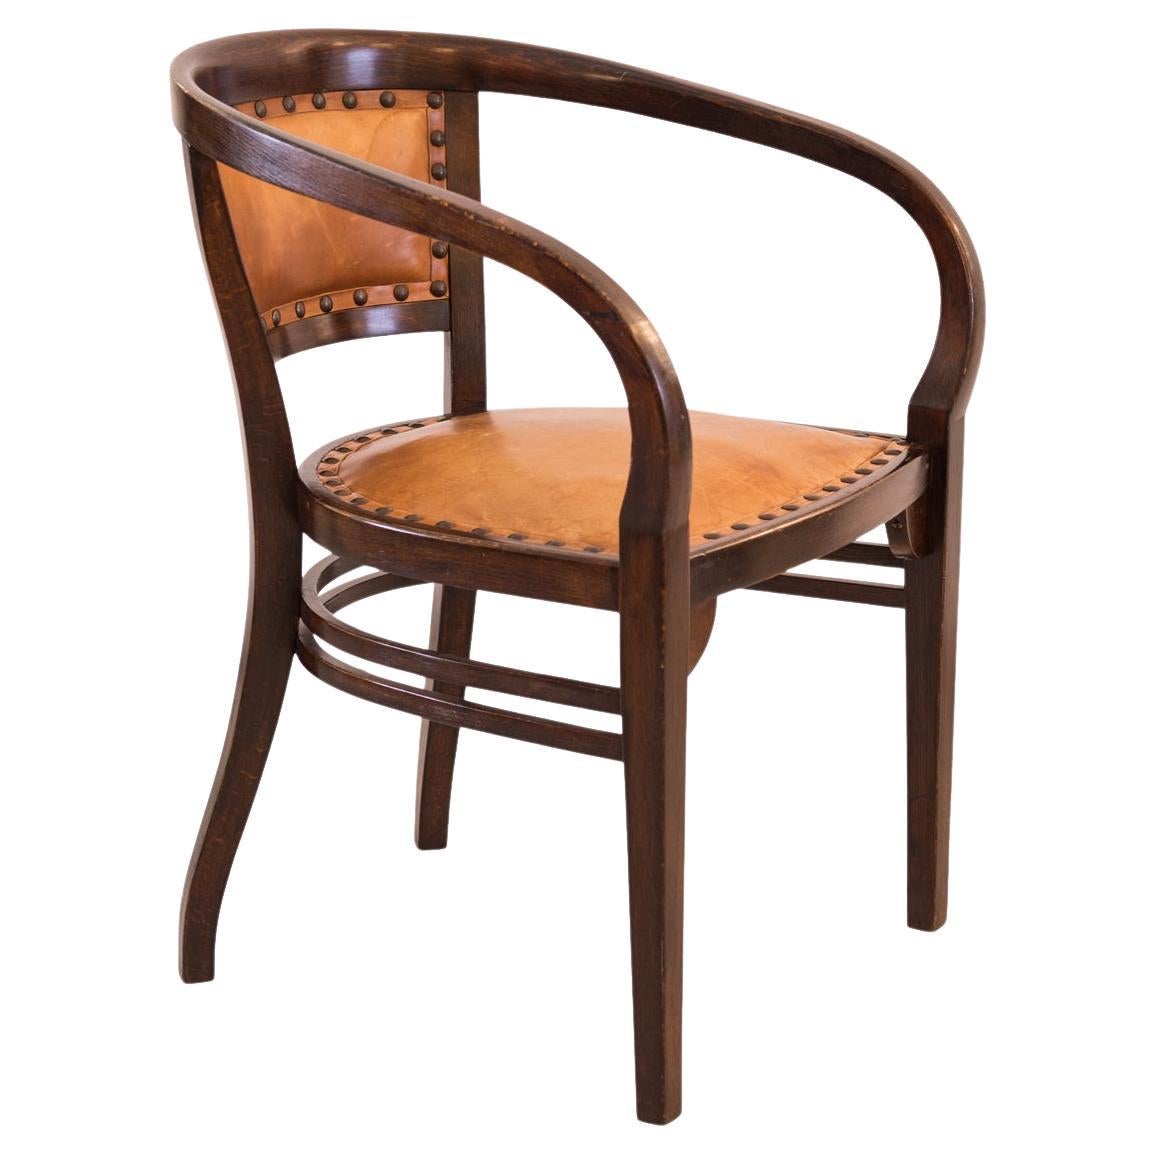 Extremely Rare and Beautiful Otto Wagner Chair by Thonet Vienna 1901 Jugendstil For Sale